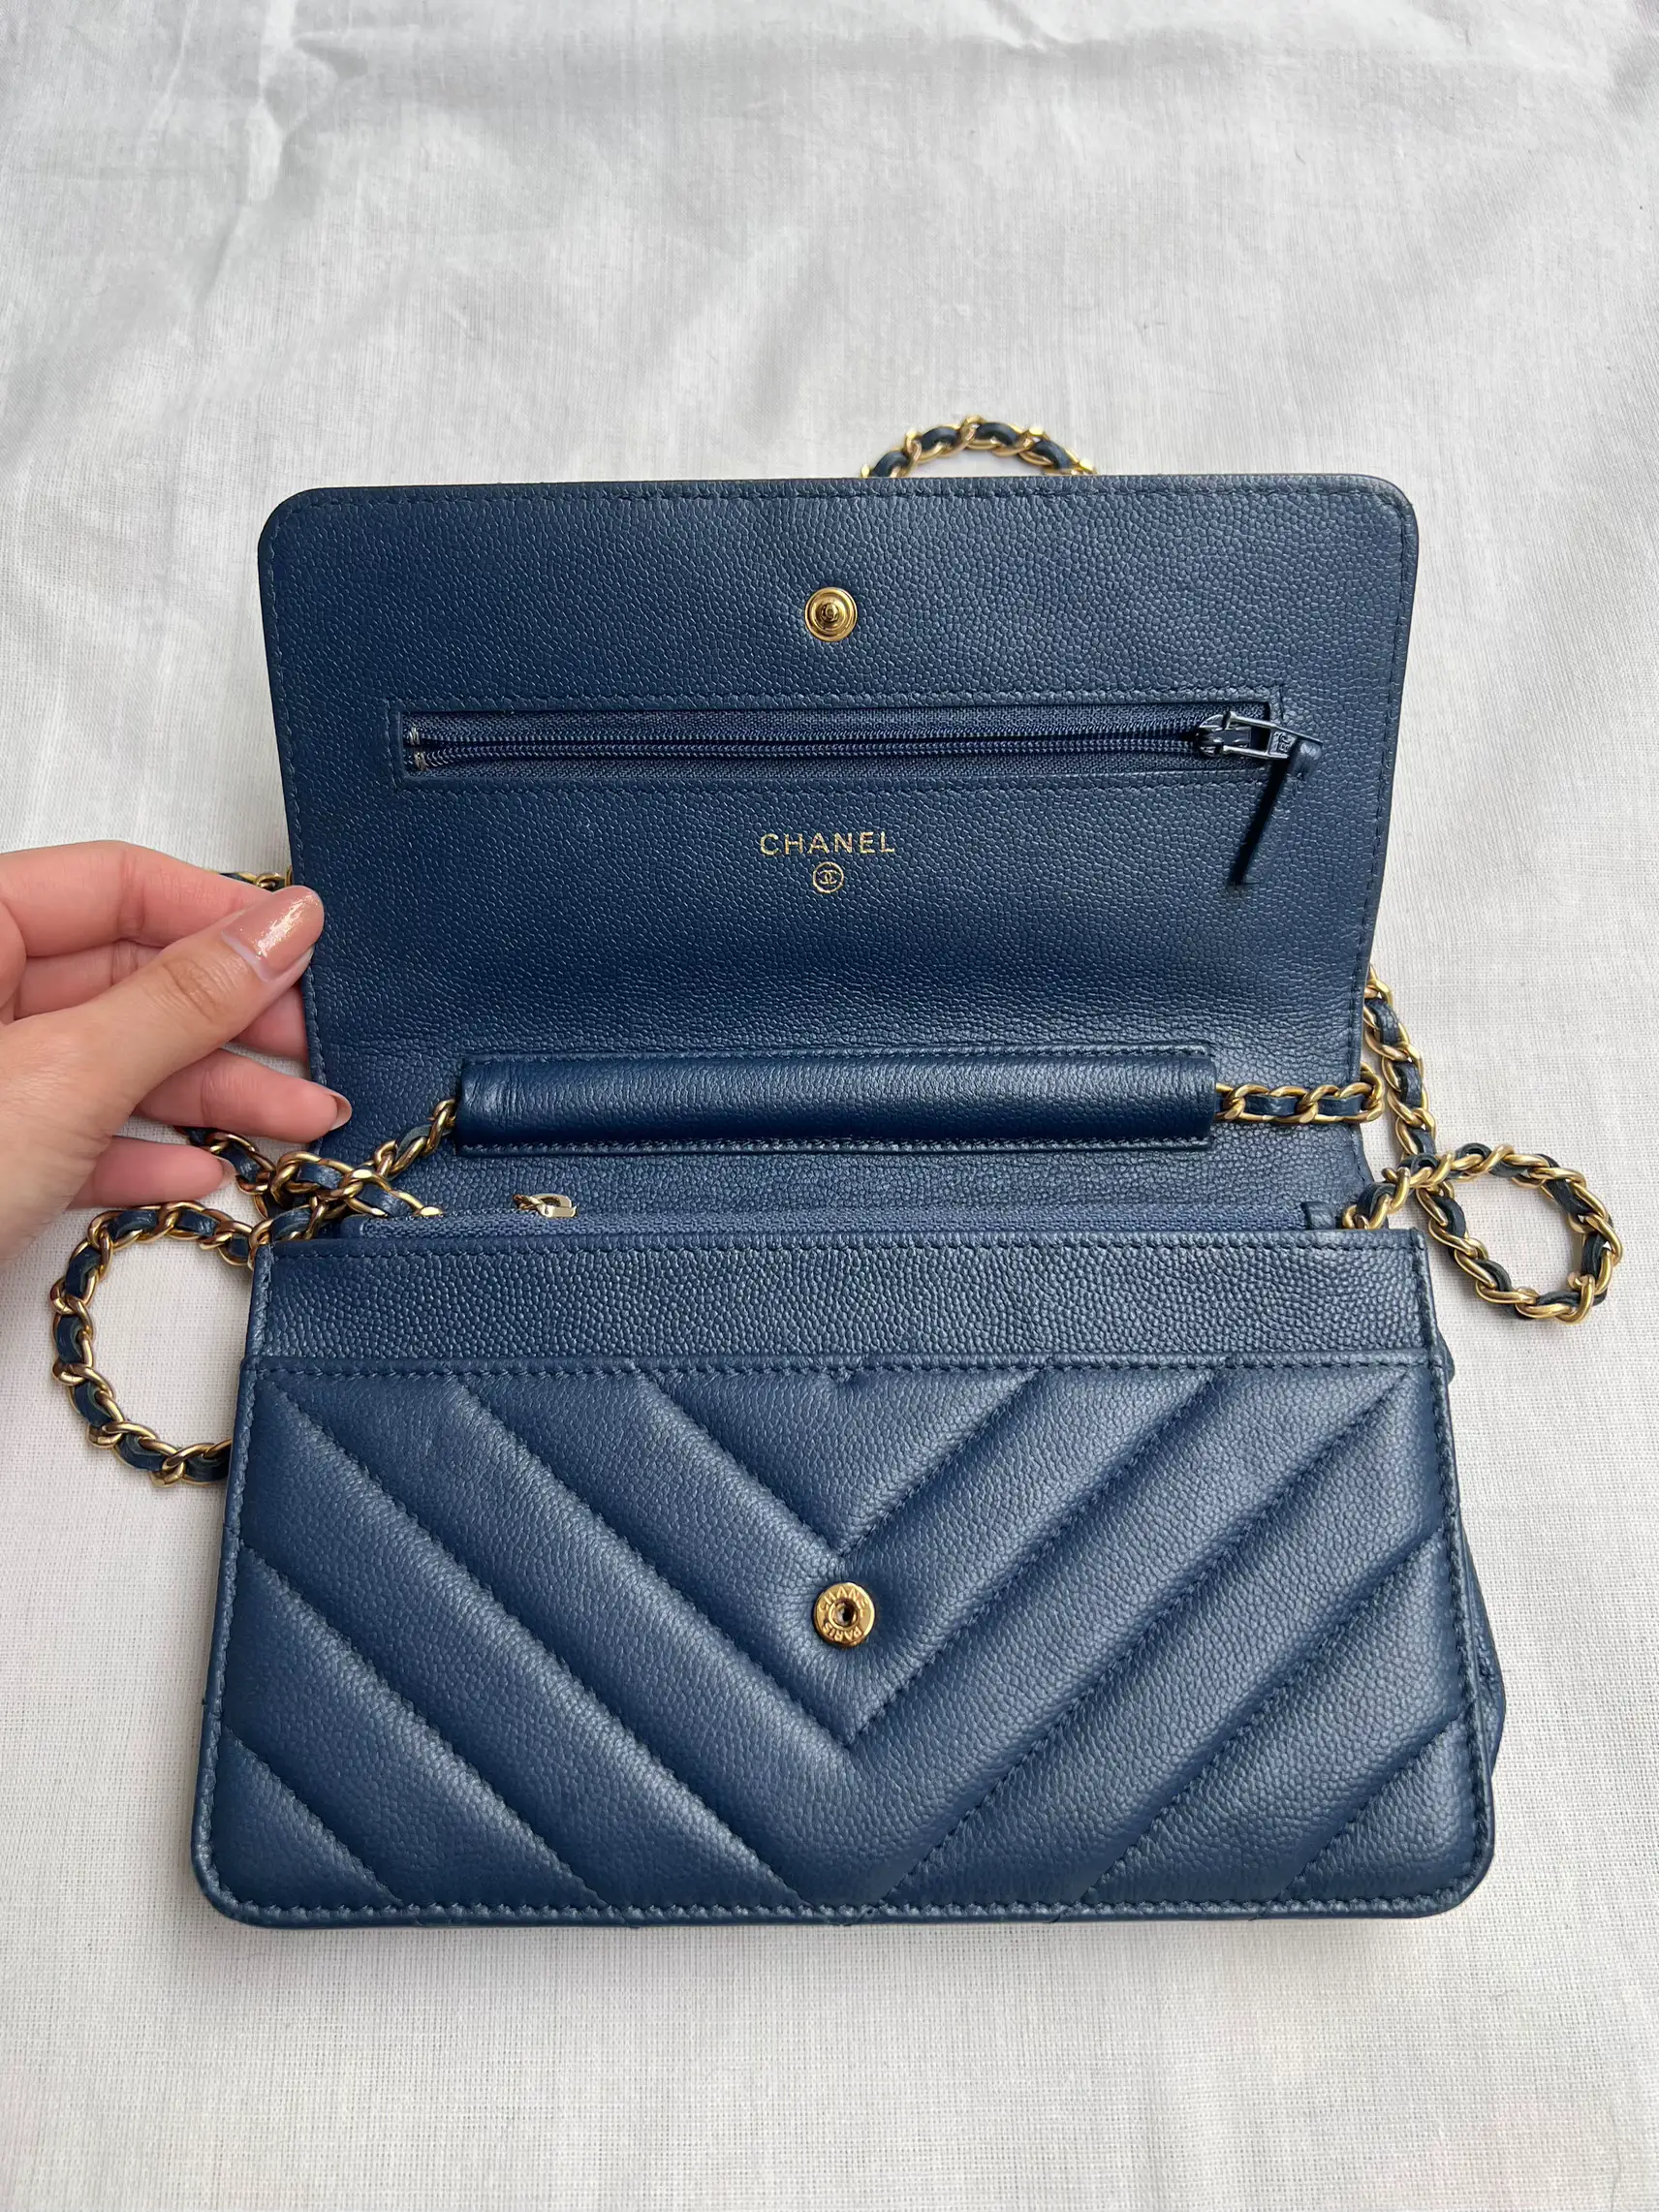 Classic branded bag. Dior LV gucci chanel. Luxury, Gallery posted by  Chuacattleya